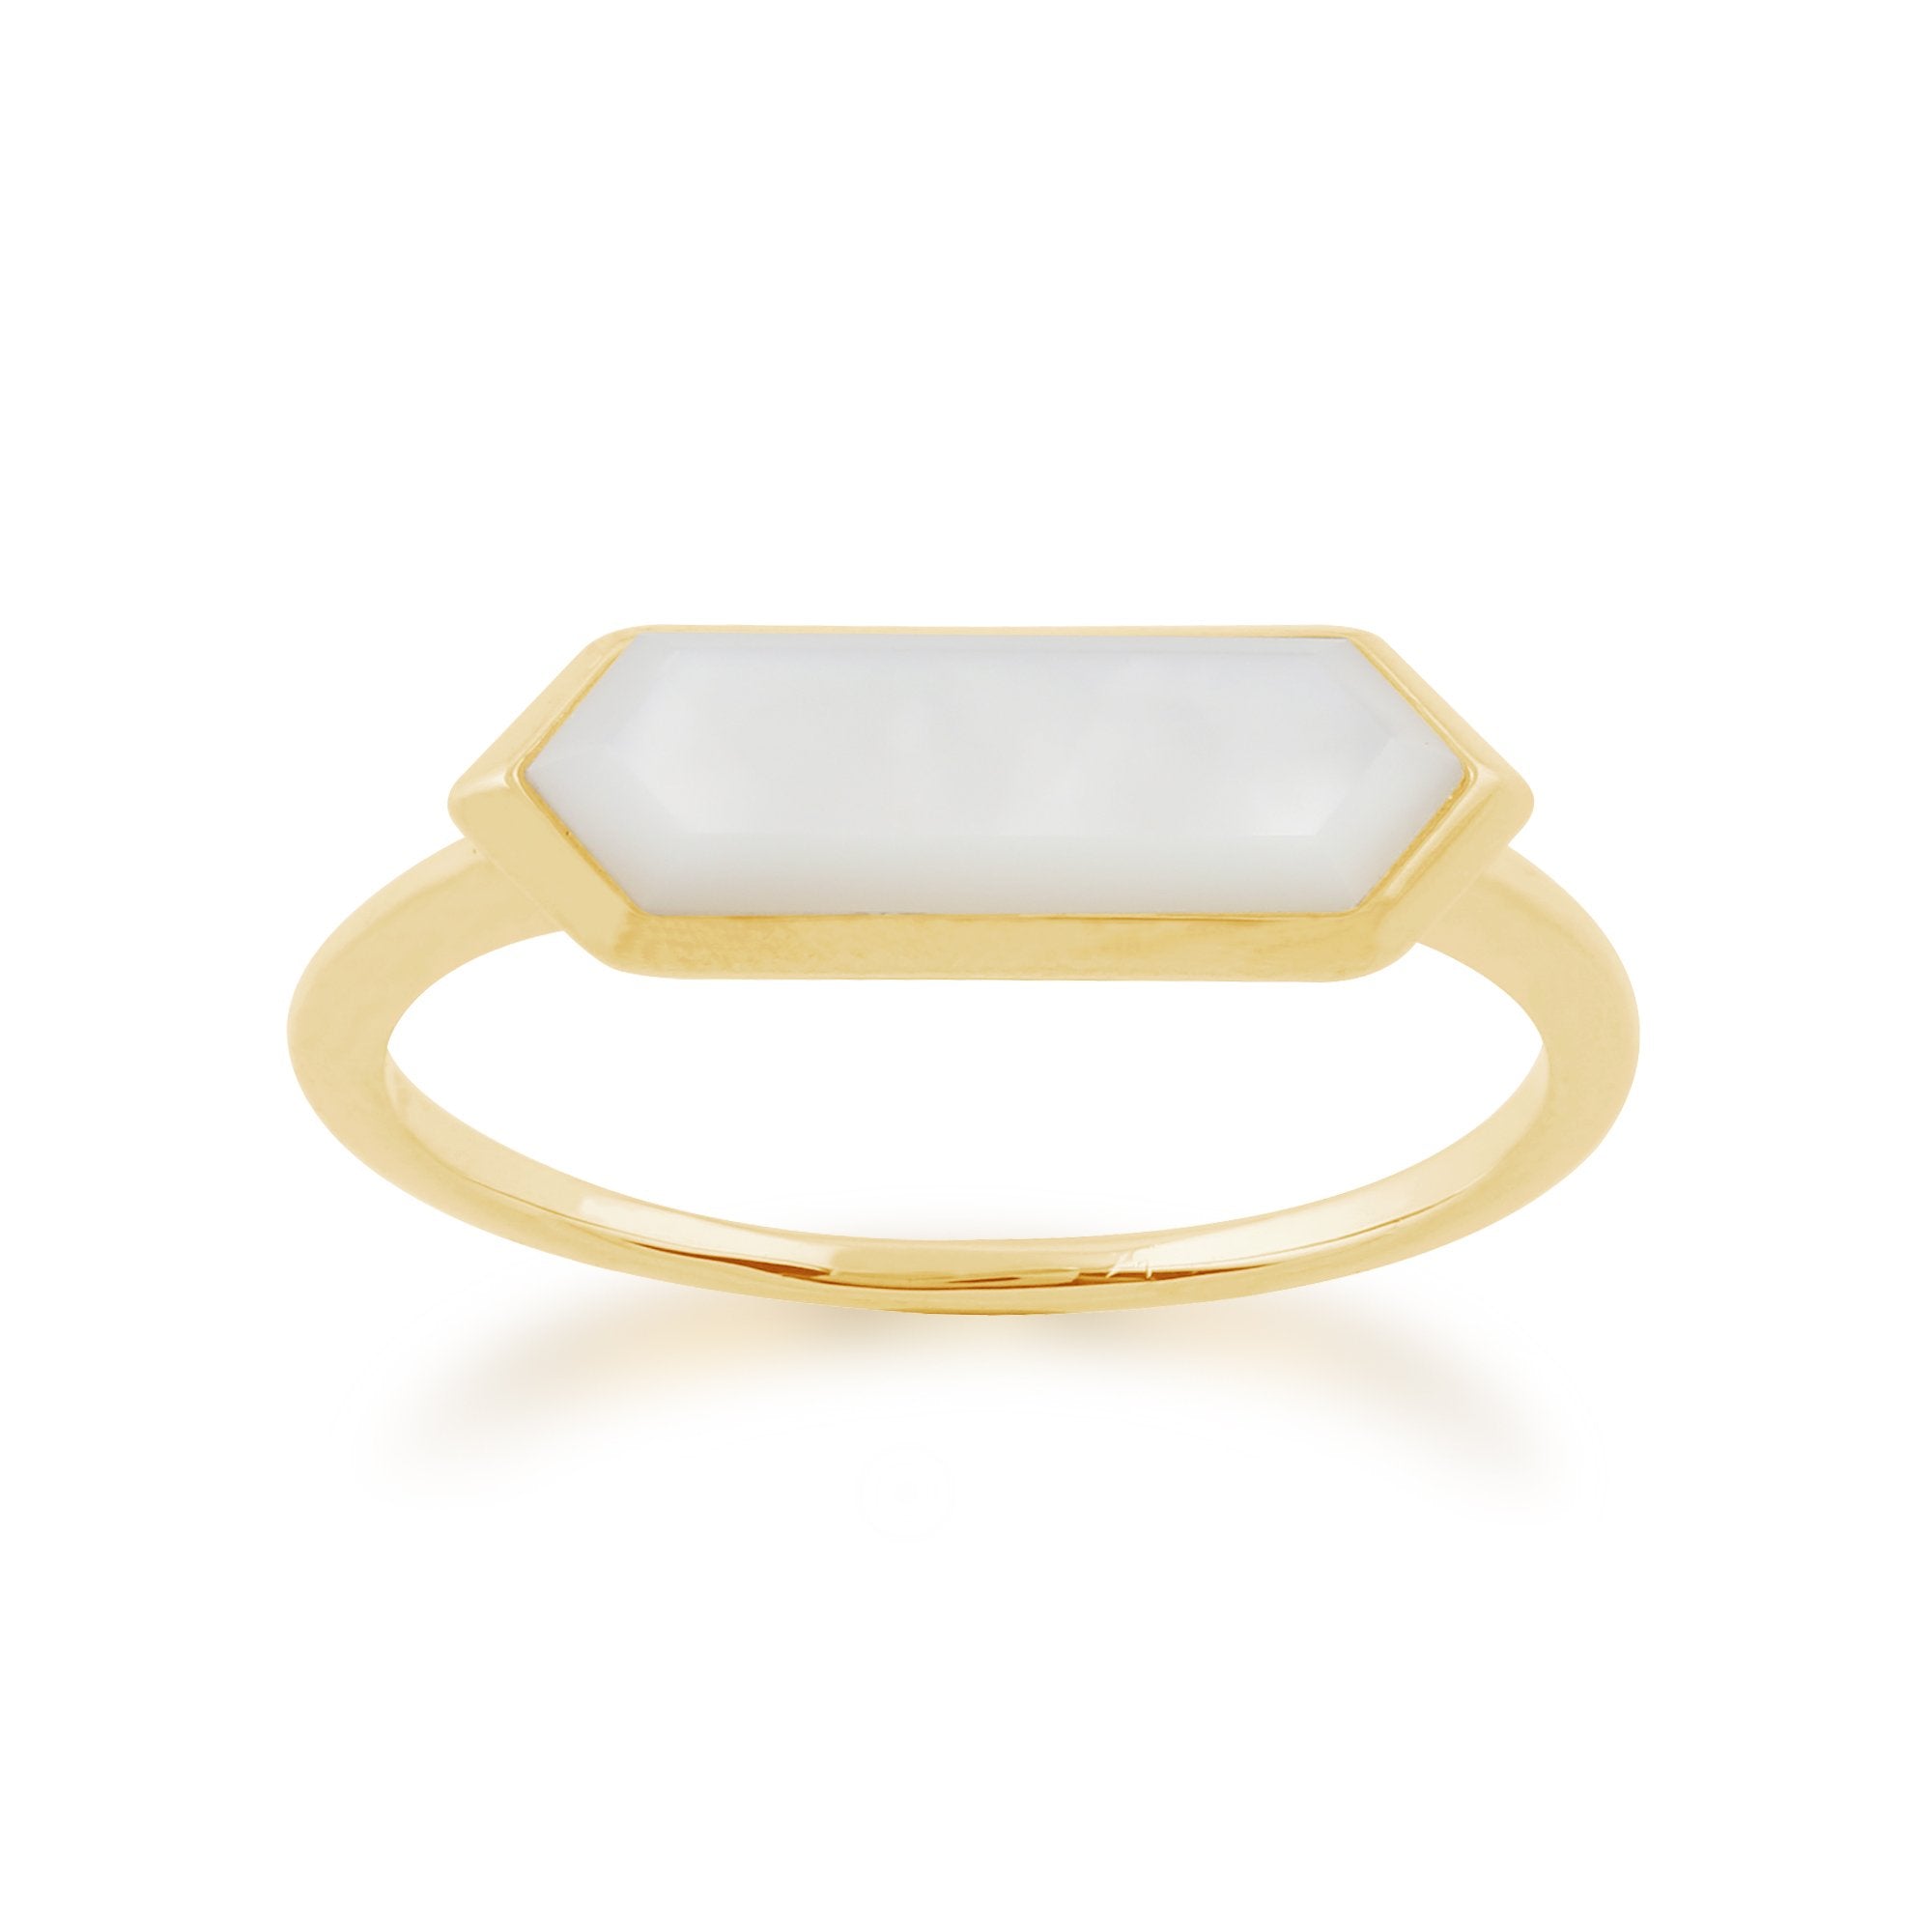 Gemondo 925 Gold Plated Silver 1.85ct Mother of Pearl Hexagonal Prism Ring Image 1